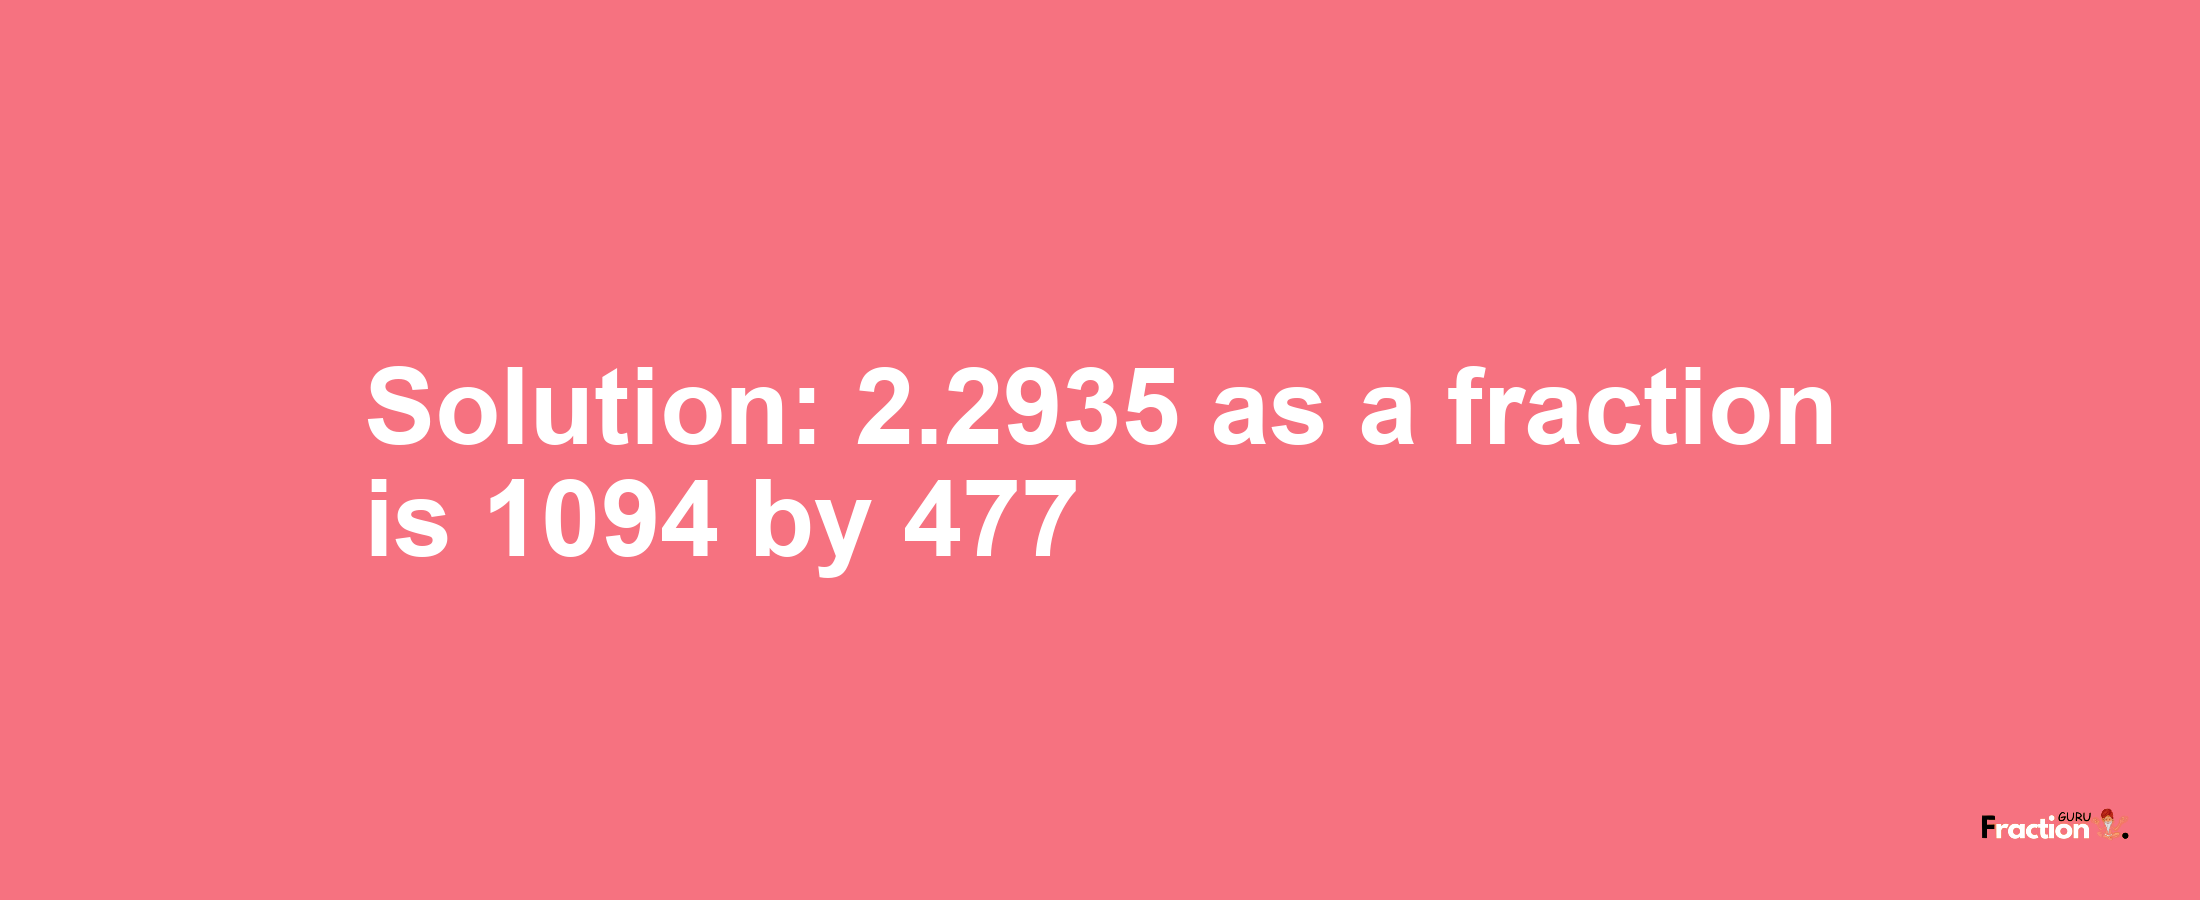 Solution:2.2935 as a fraction is 1094/477